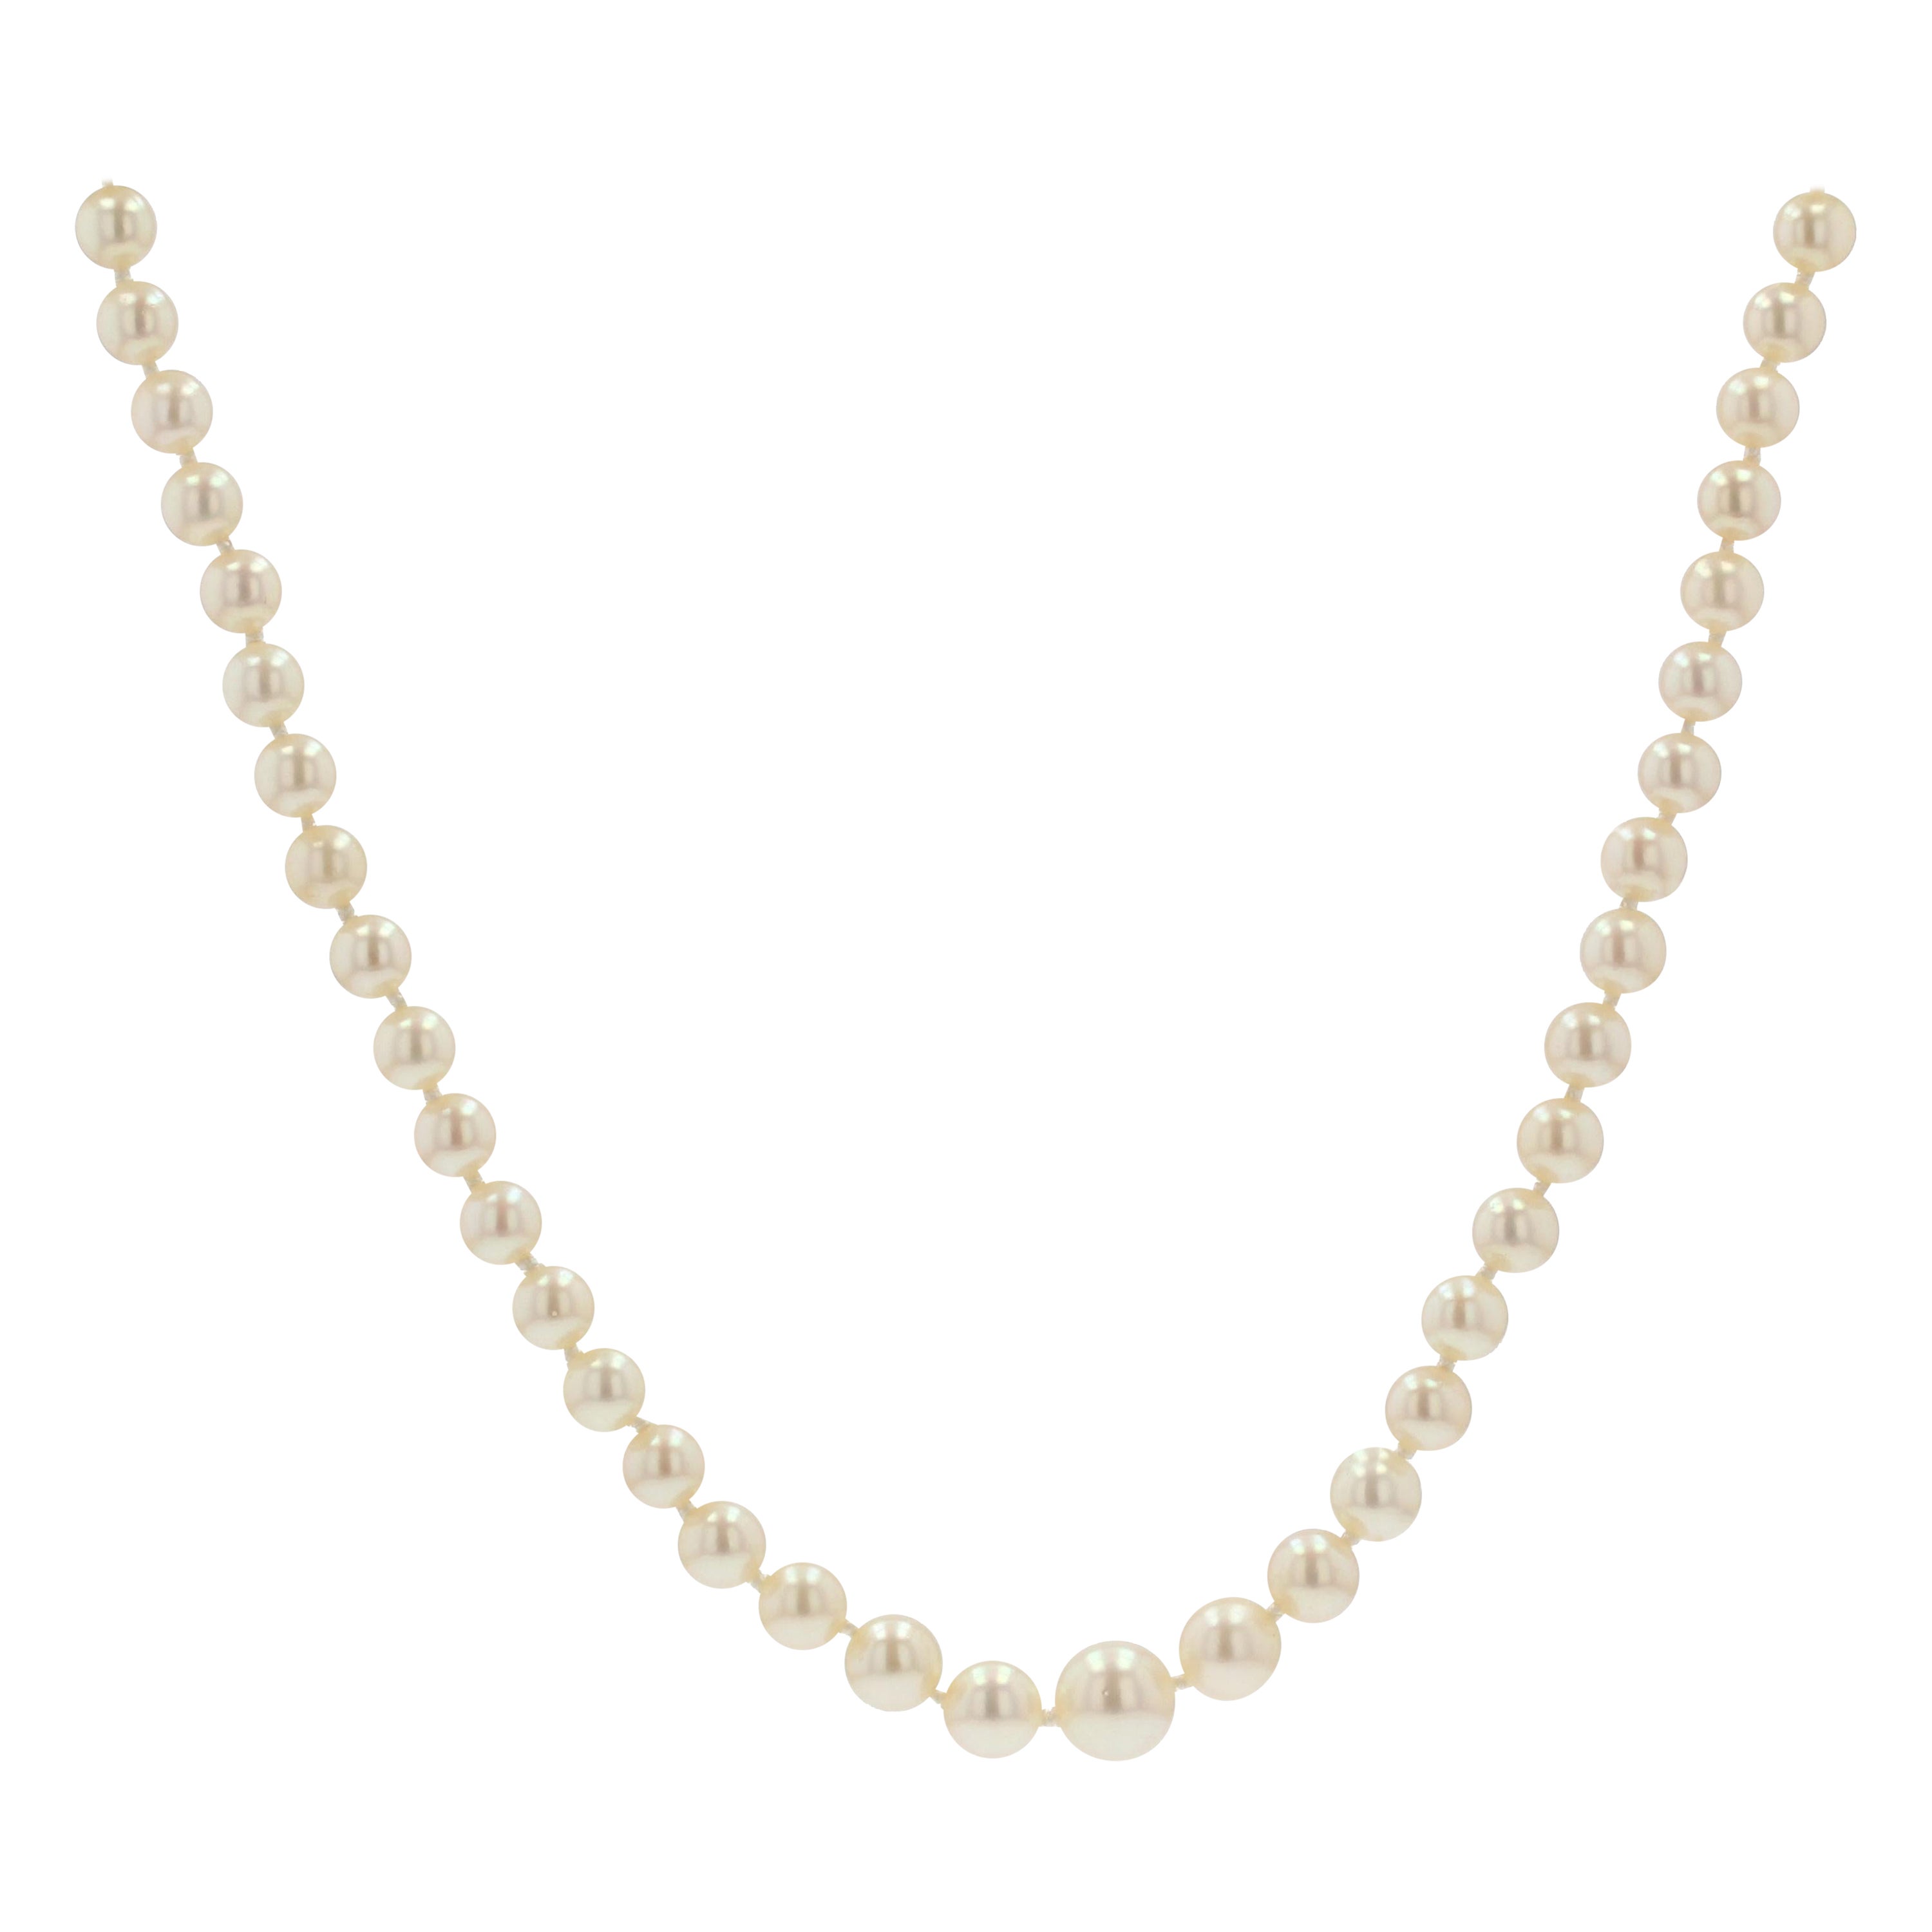 1950s Cultured Round White Pearl Necklace